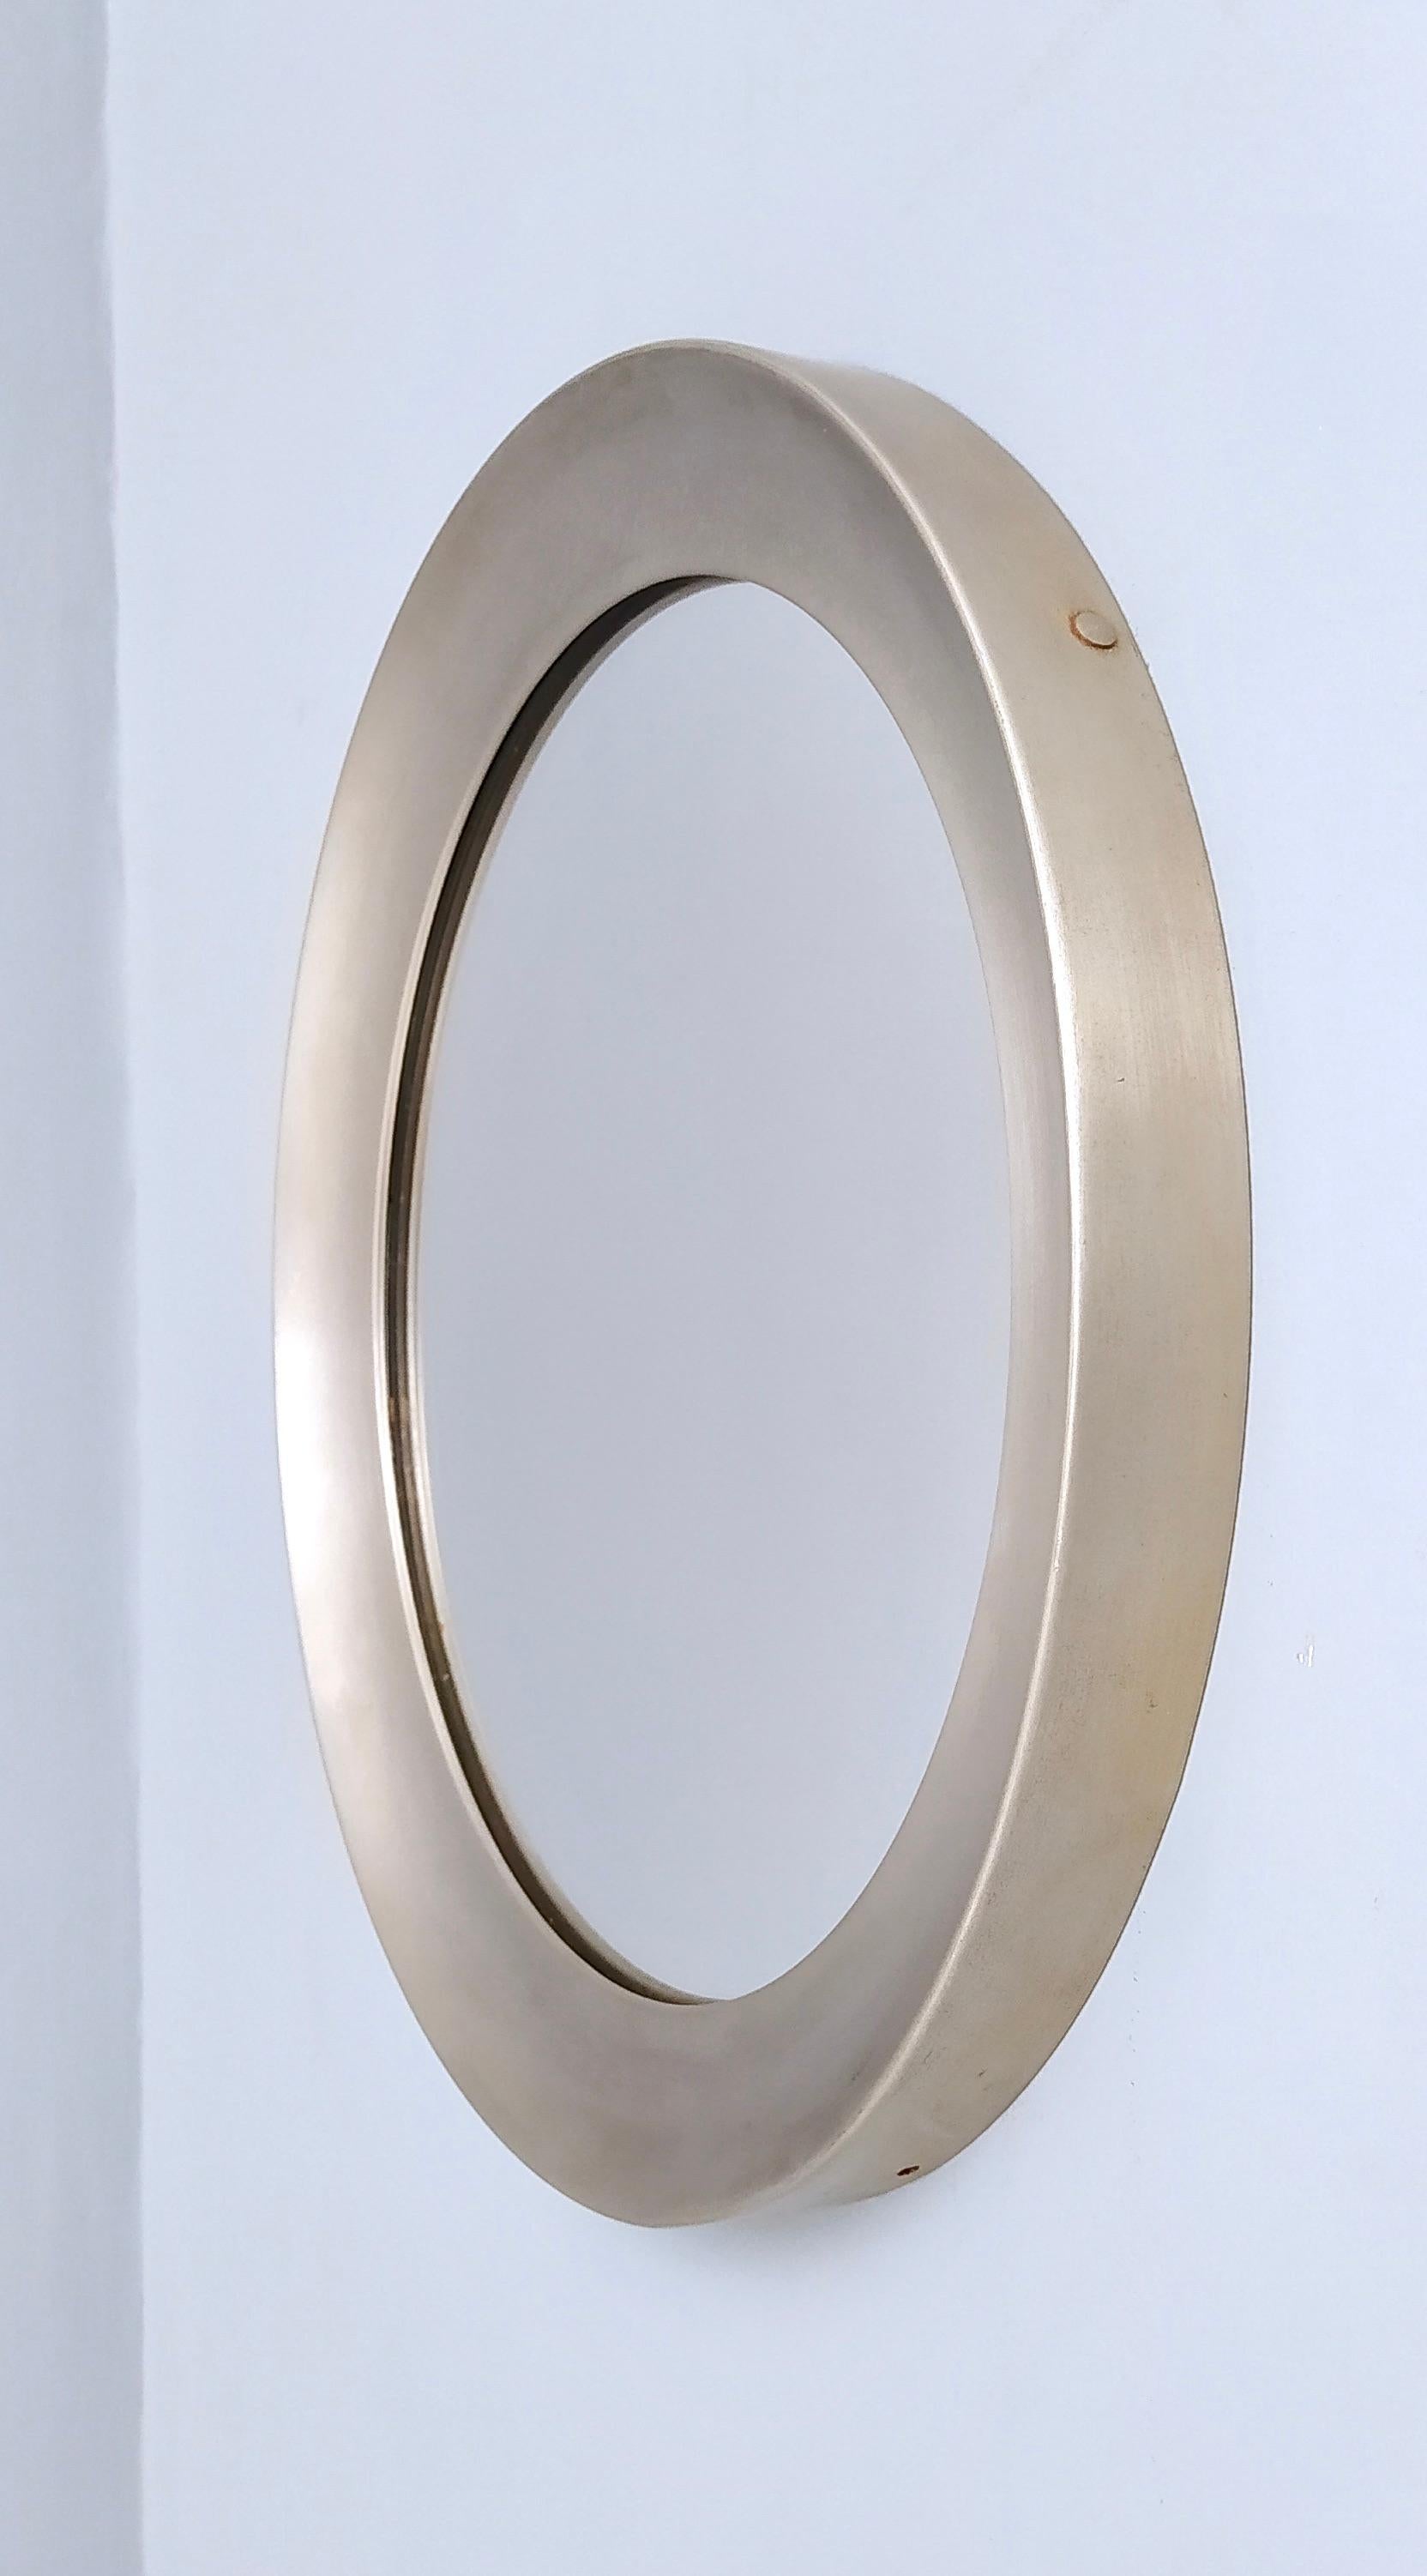 Vintage Round Narciso Mirror with Steel Frame by S. Mazza for Artemide, Italy In Excellent Condition For Sale In Bresso, Lombardy